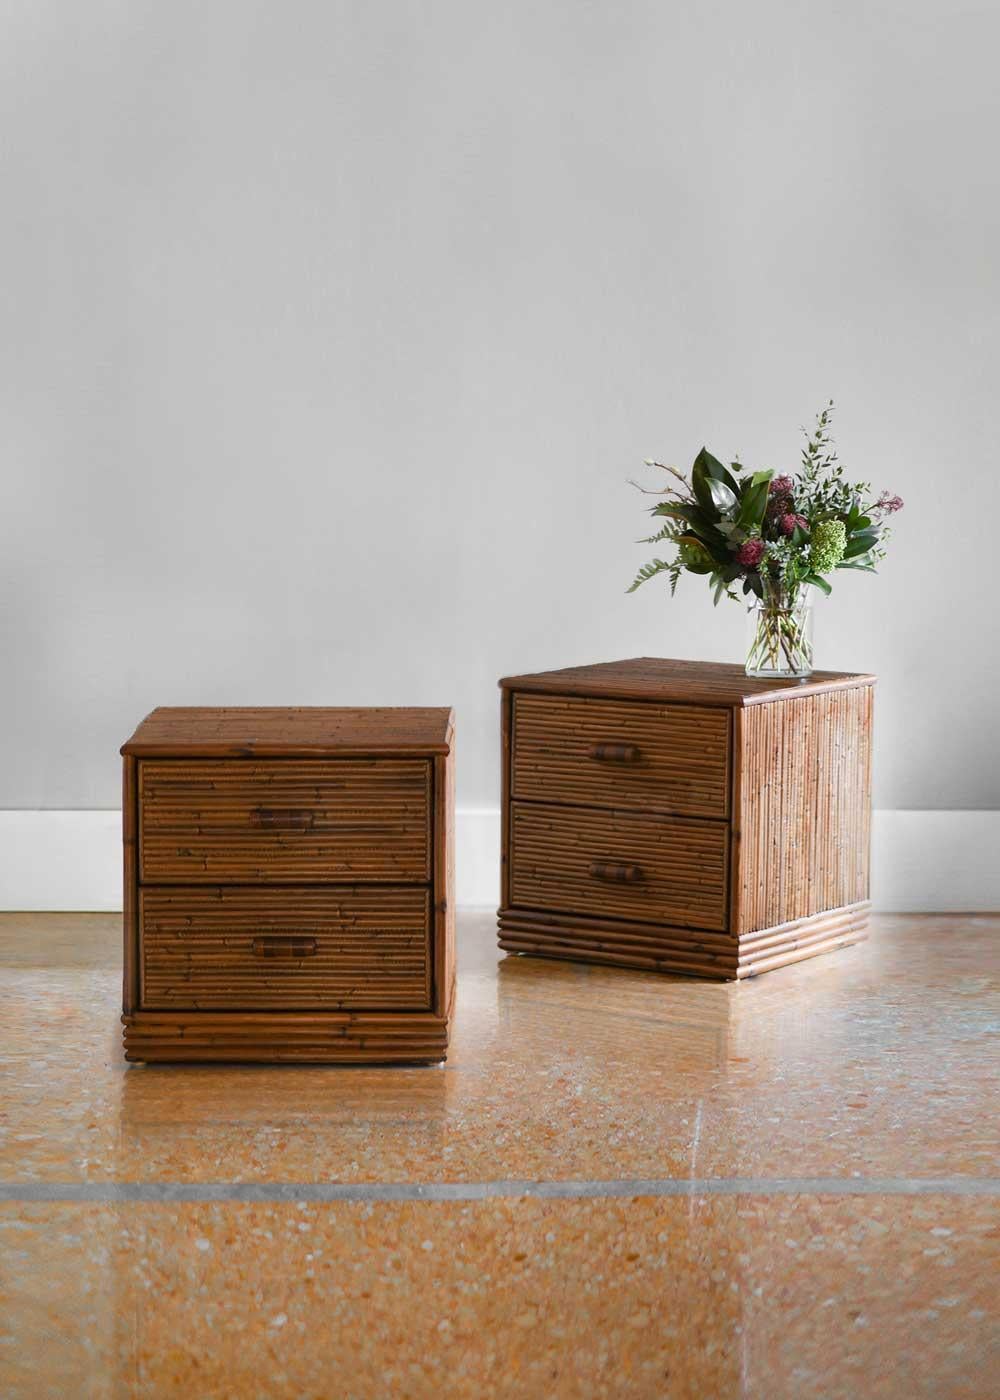 Pair of bamboo bedside tables with leather bindings. Italian artisanal production.
Product details
Dimensions of the single bedside: 49w x 49h x 49d cm
Materials: bamboo, leather
Production: Italian manufacturing.